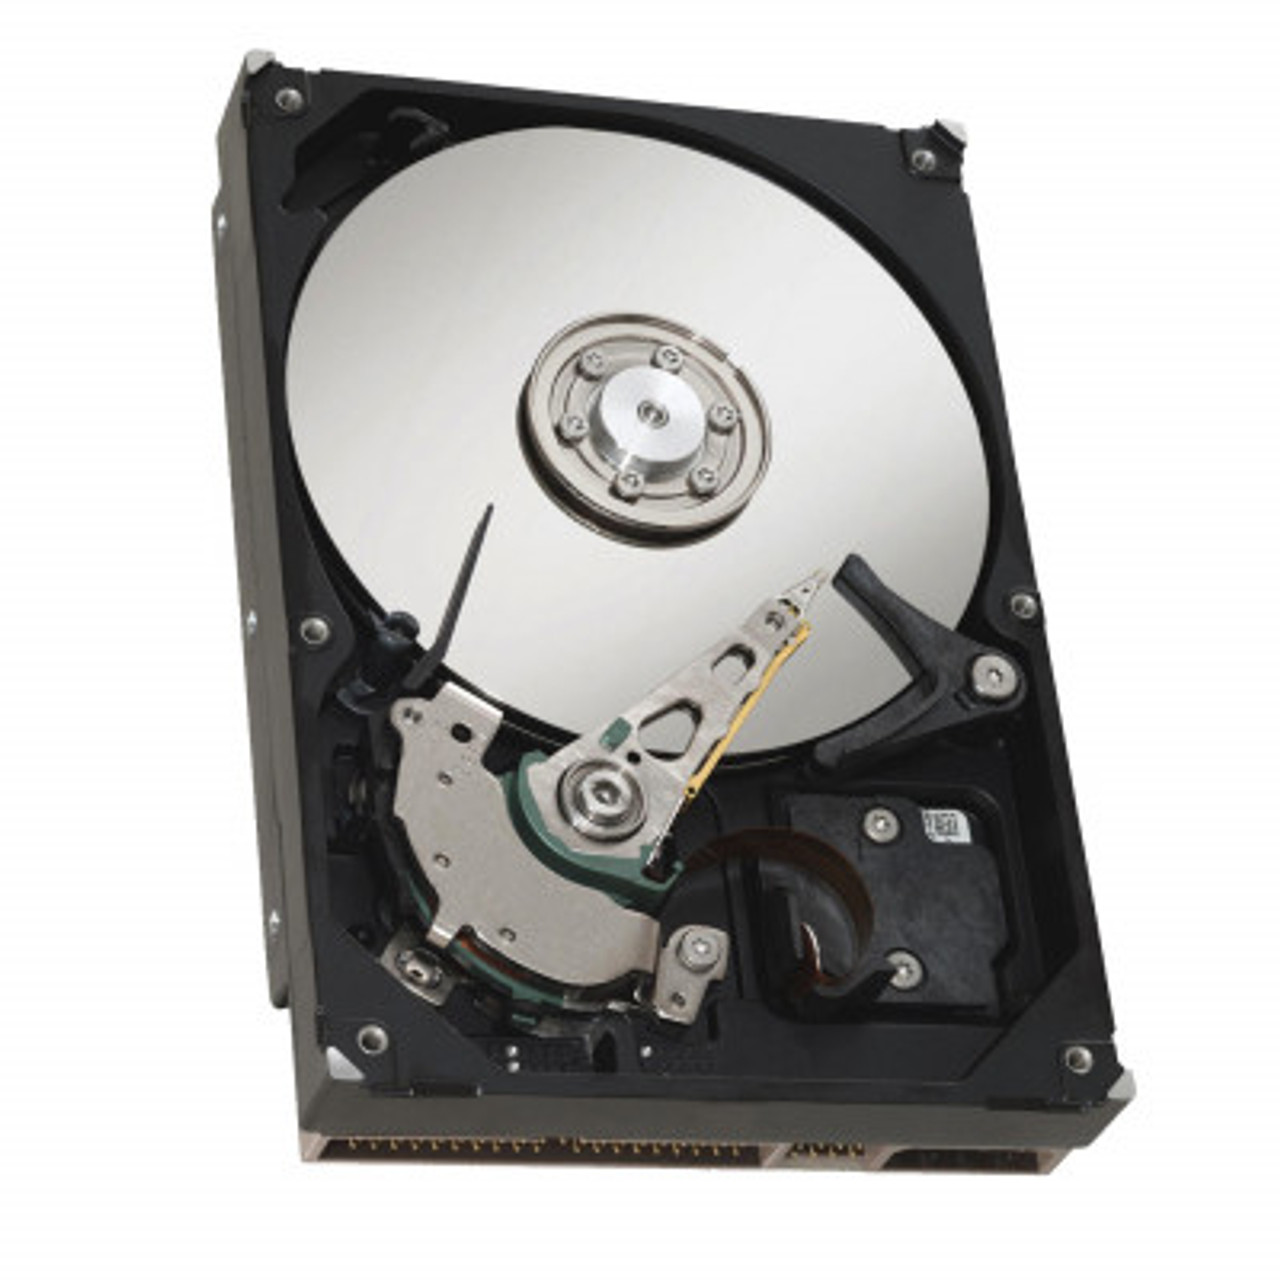 5063-5400 - HP 2.1GB 5400RPM Ultra Wide SCSI Single-Ended Narrow 50-Pin 3.5-inch Hard Drive